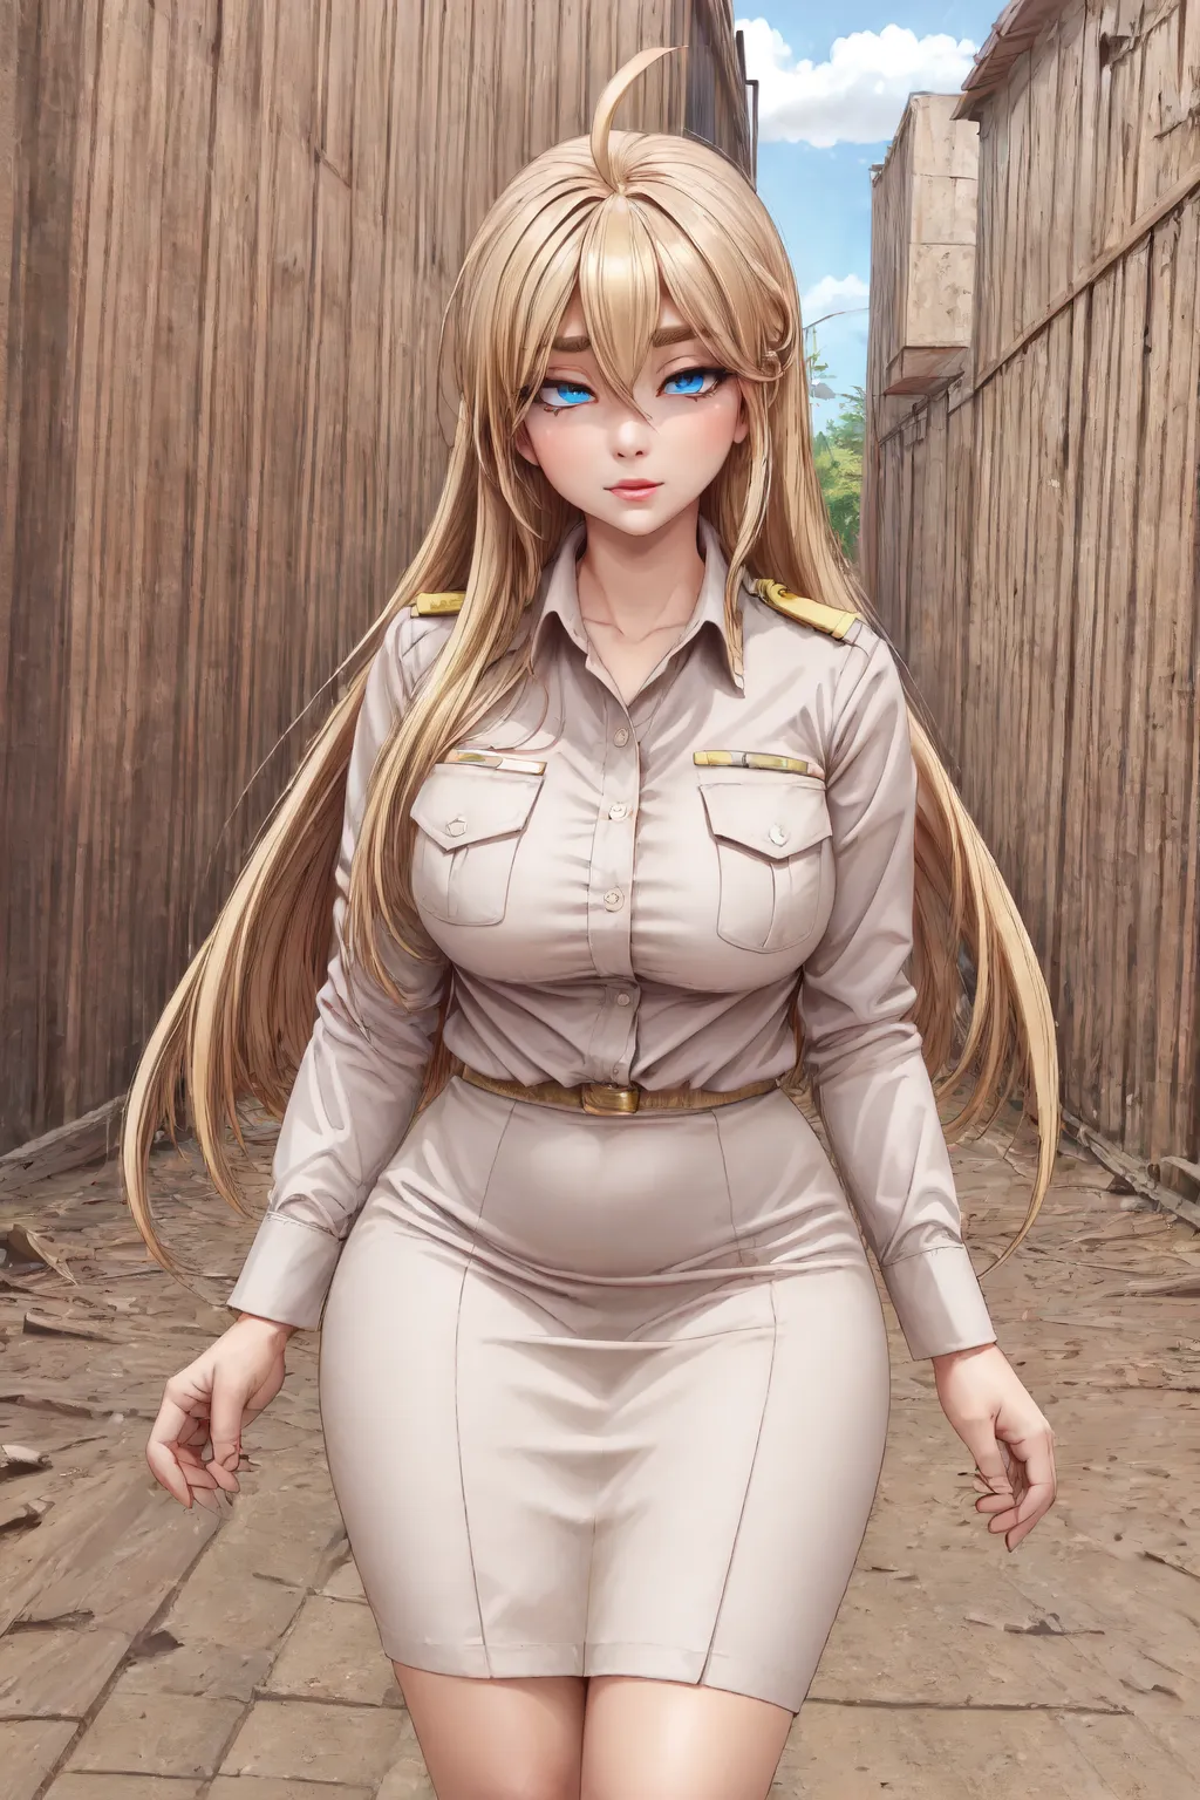 AI model image by slime77744784